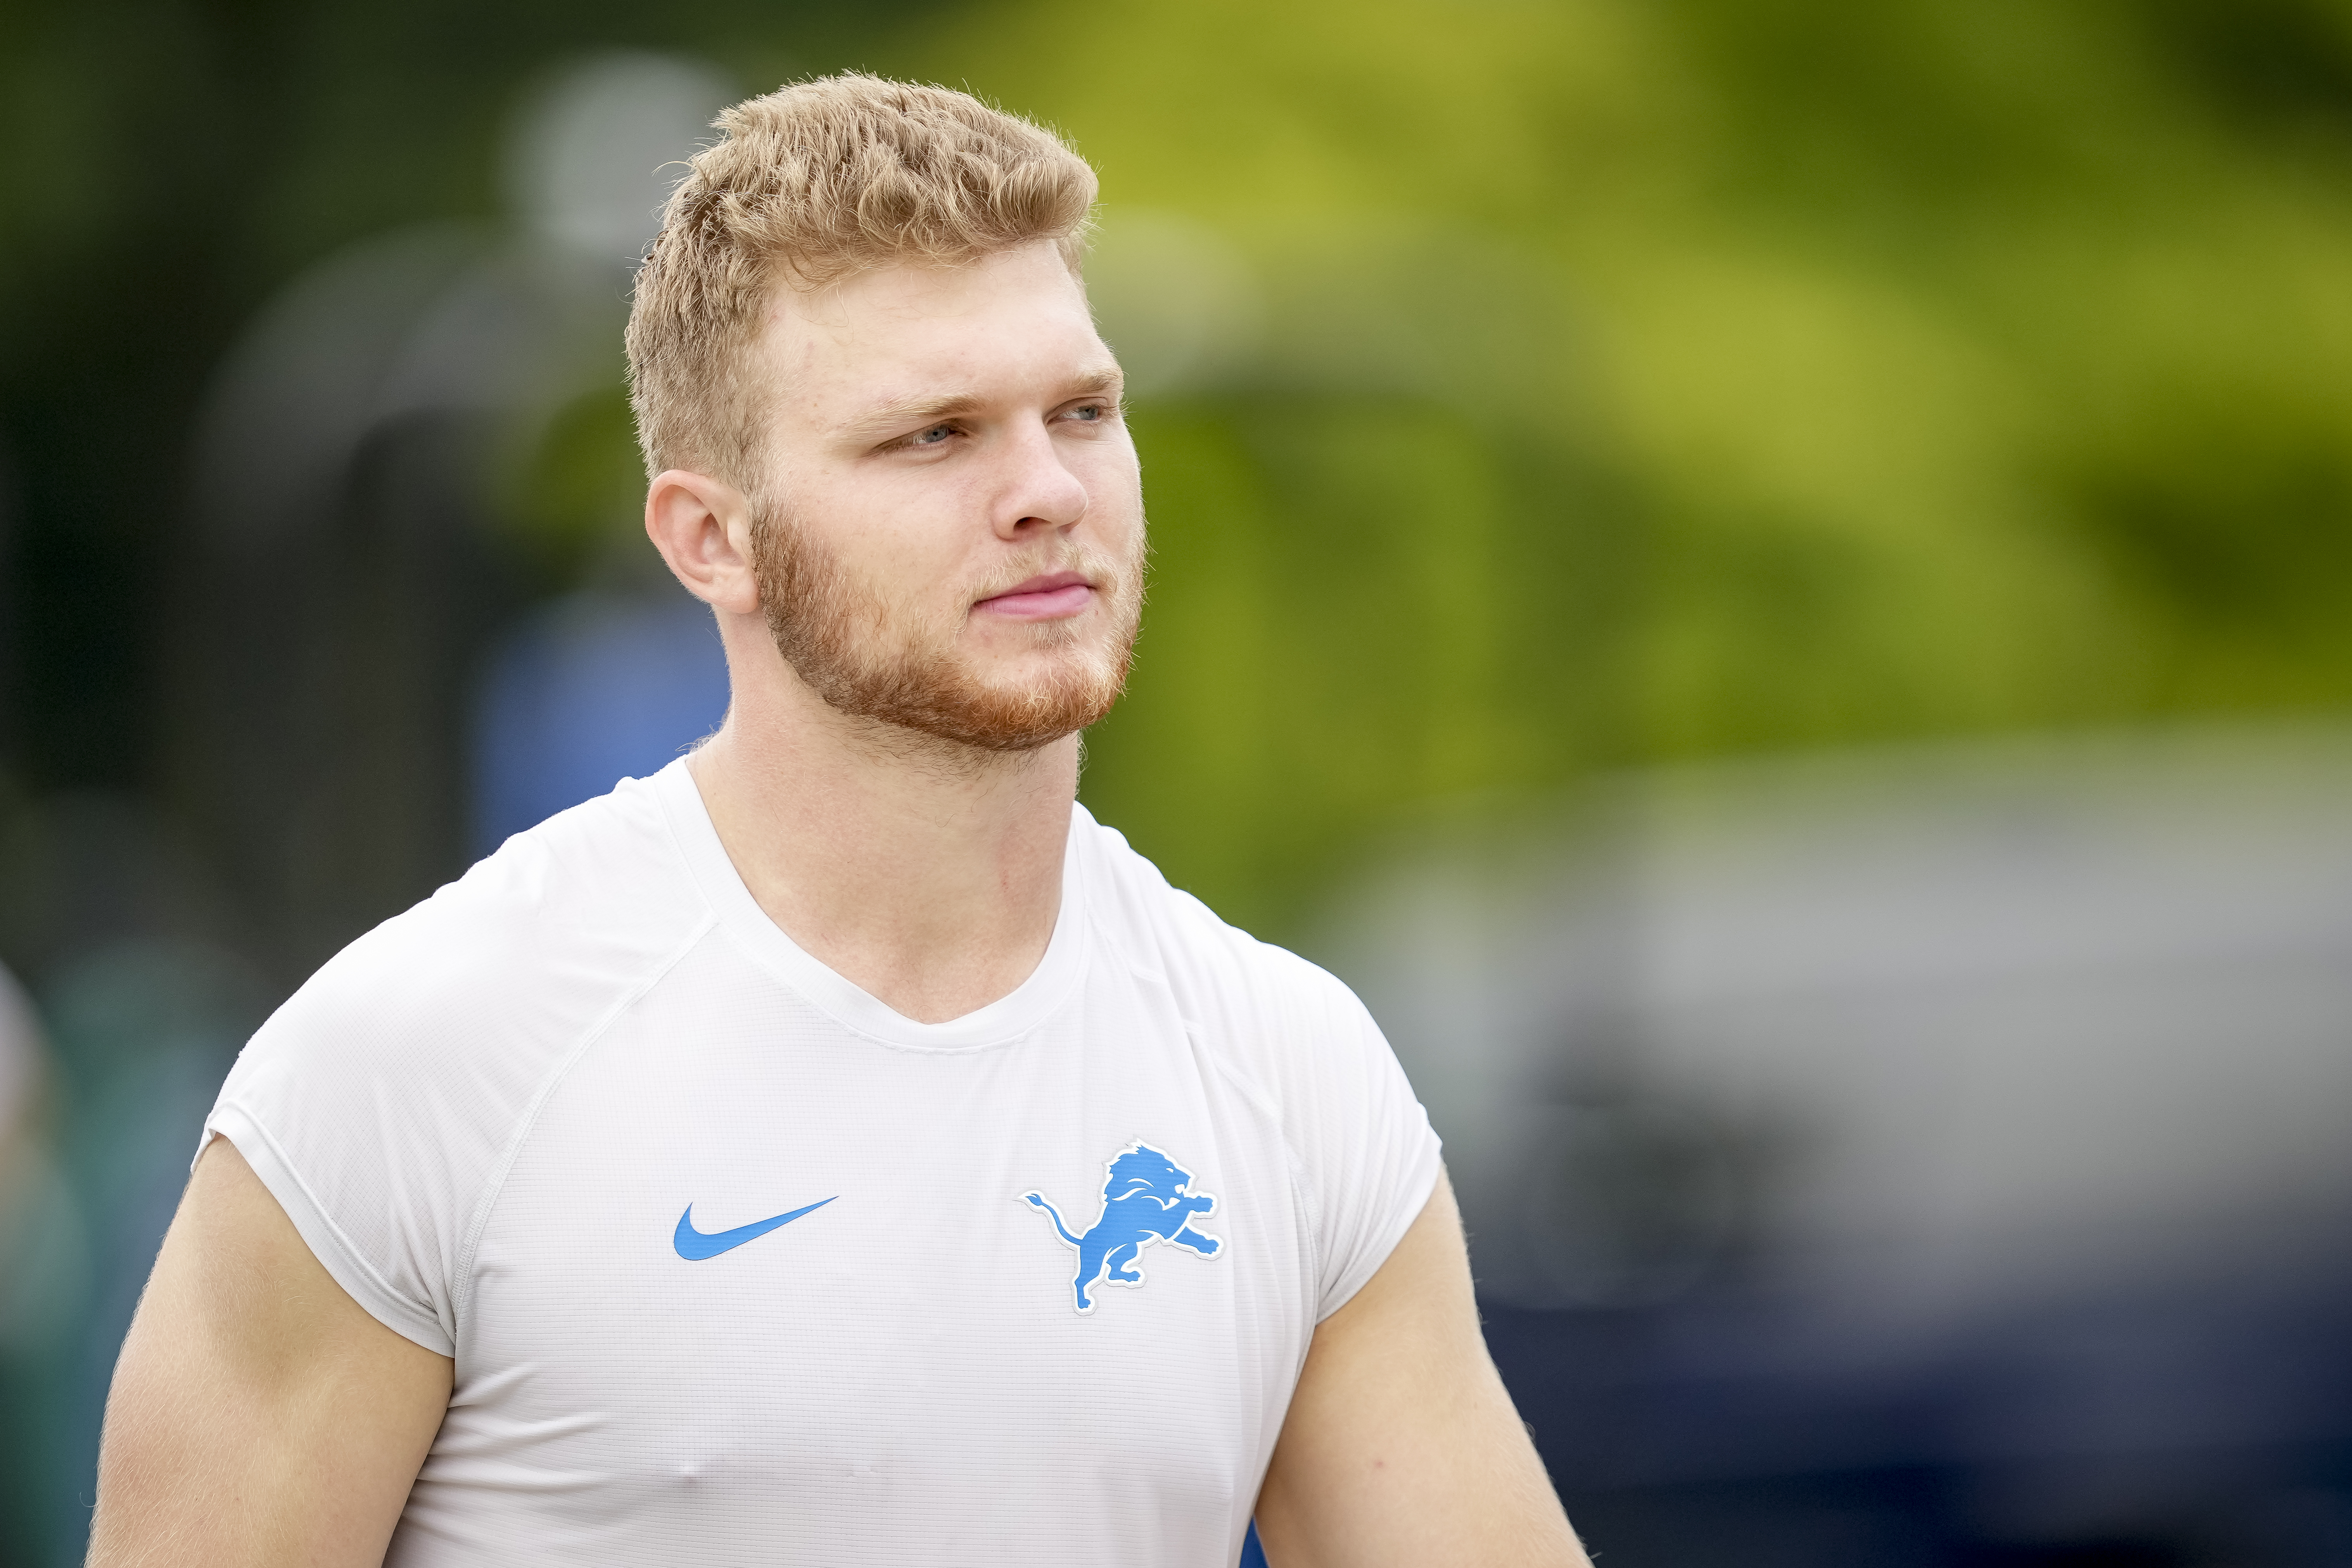 Aidan Hutchinson #97 of the Detroit Lions looks on during the Detroit Lions Training Camp on July 27, 2022 at the Lions Headquarters and Training Facility in Allen Park, Michigan.